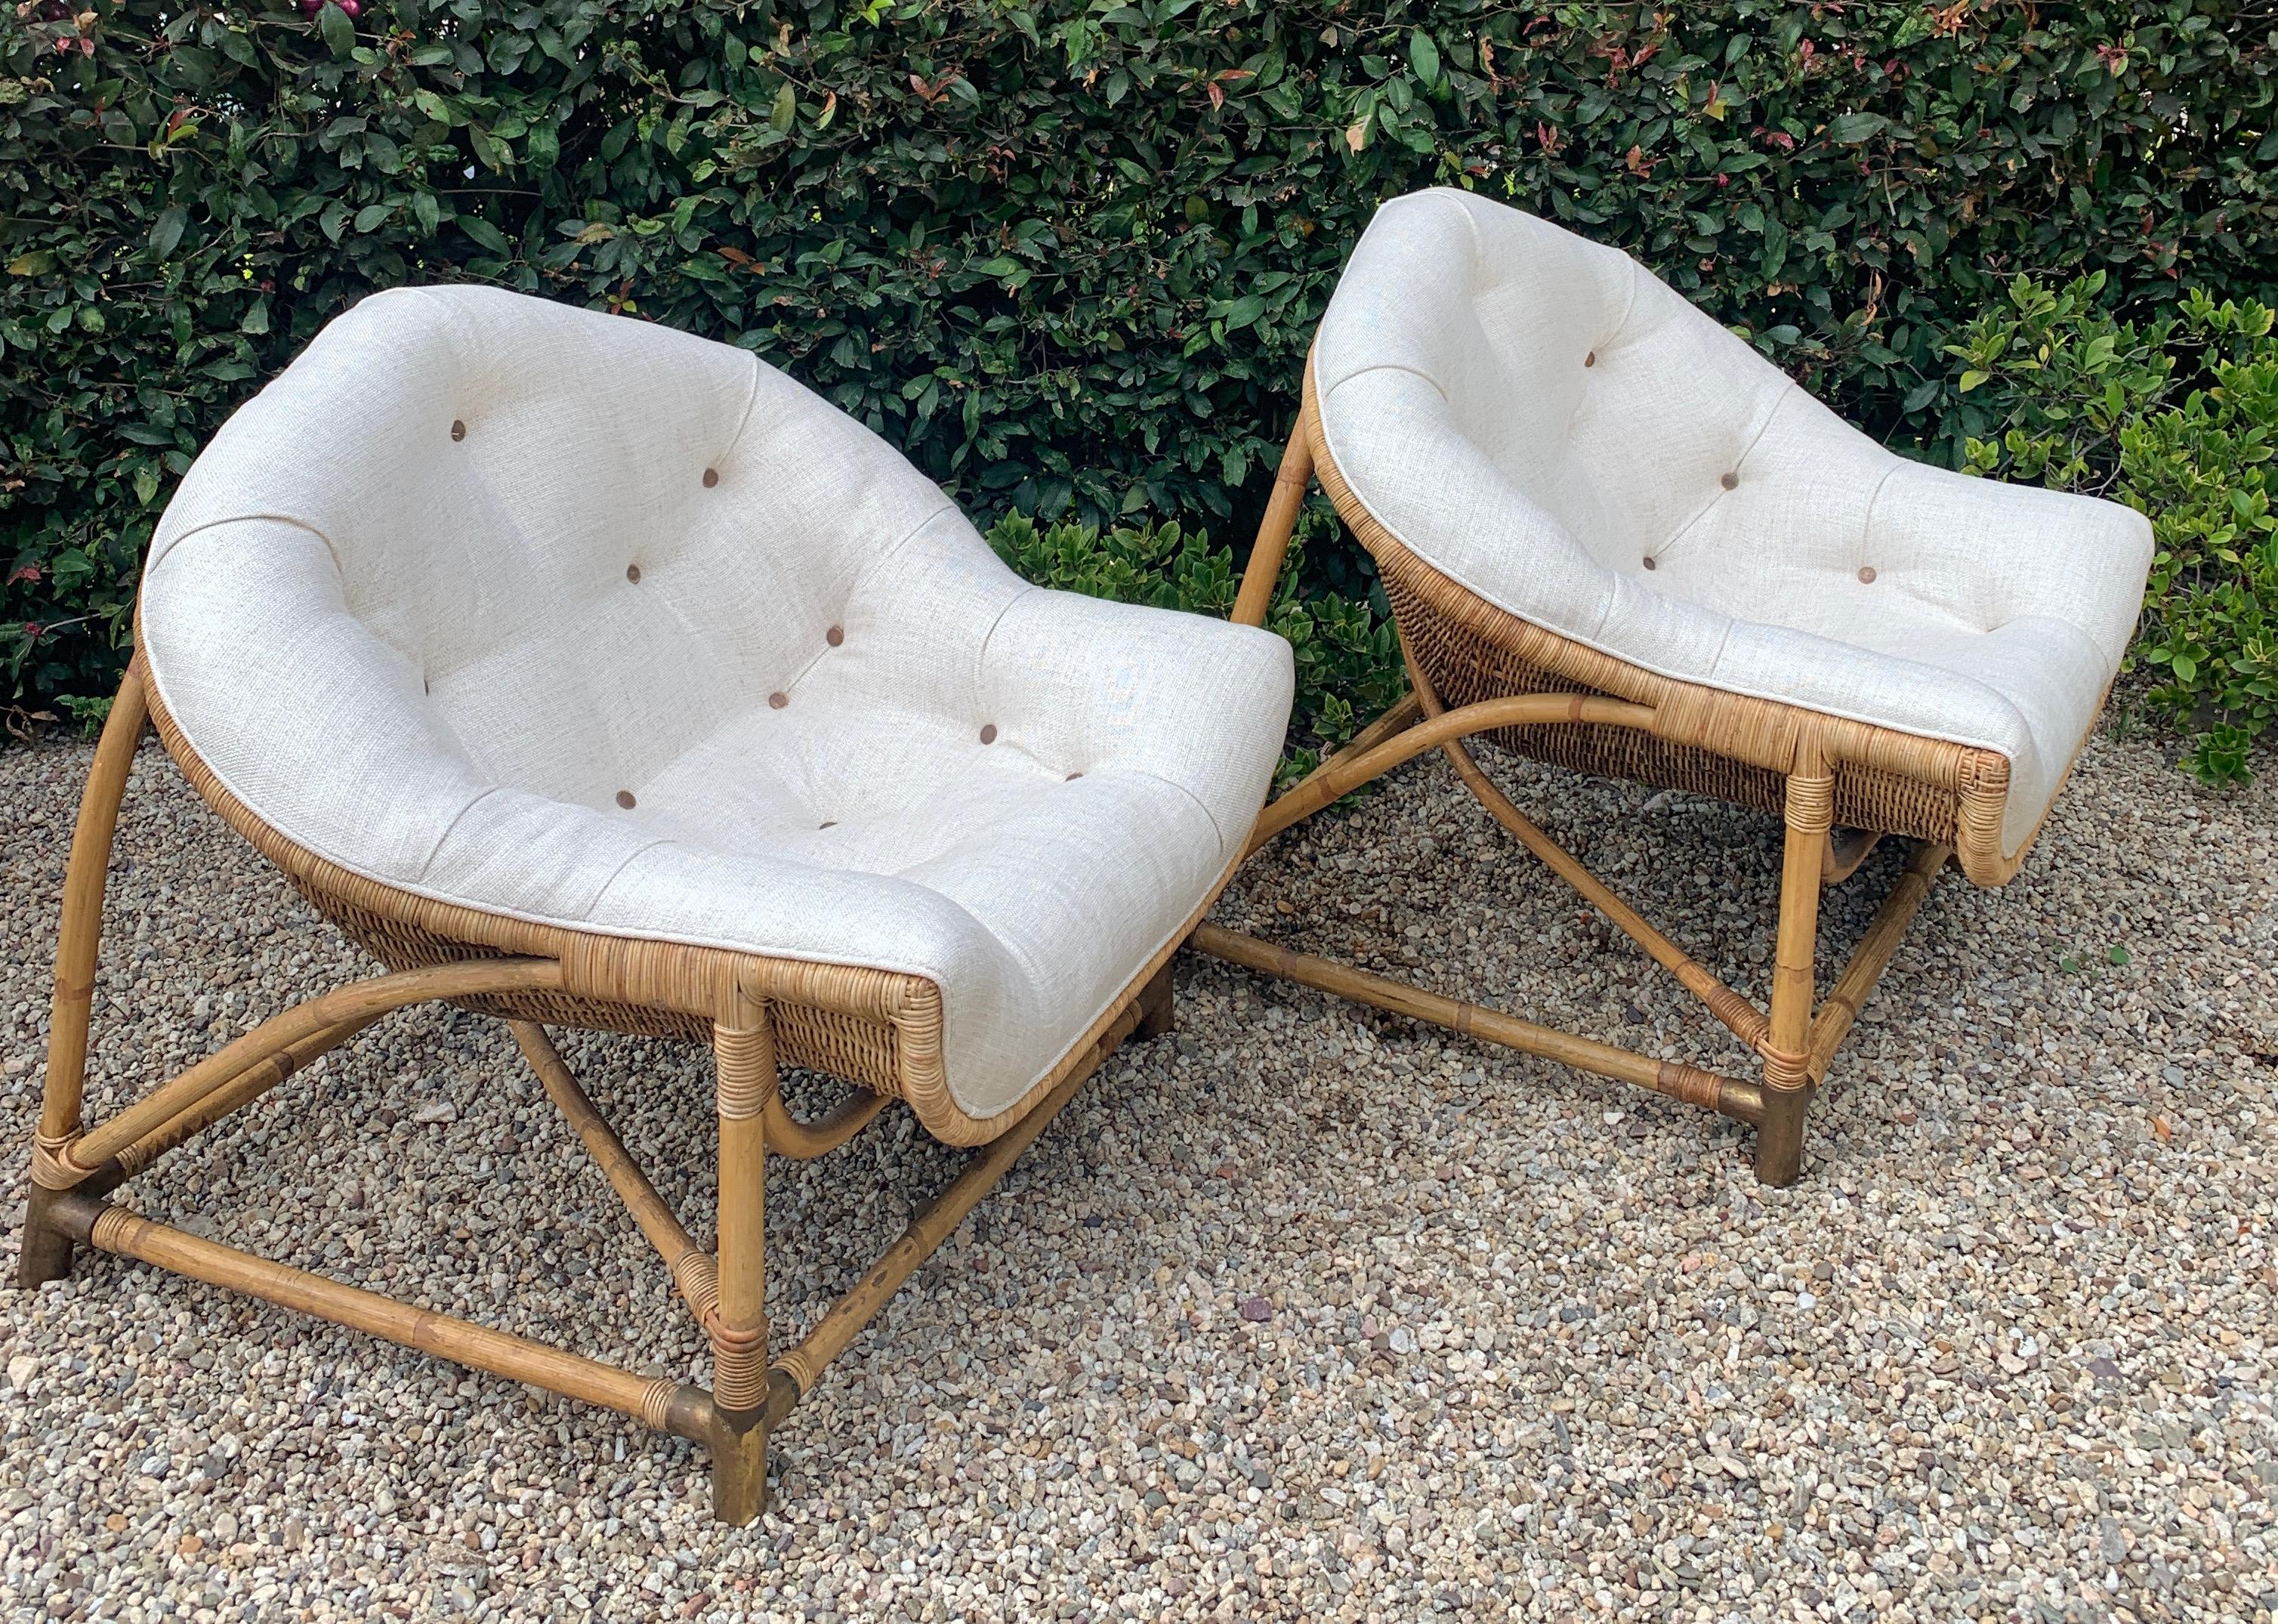 Unique and well designed, a pair of Rattan and Bamboo Lounge chairs. The vintage pair have a very intricate and well thought out design with brass sabots. The seats are very comfortable and also in a unique and moorish shaped cushion. 

Low and